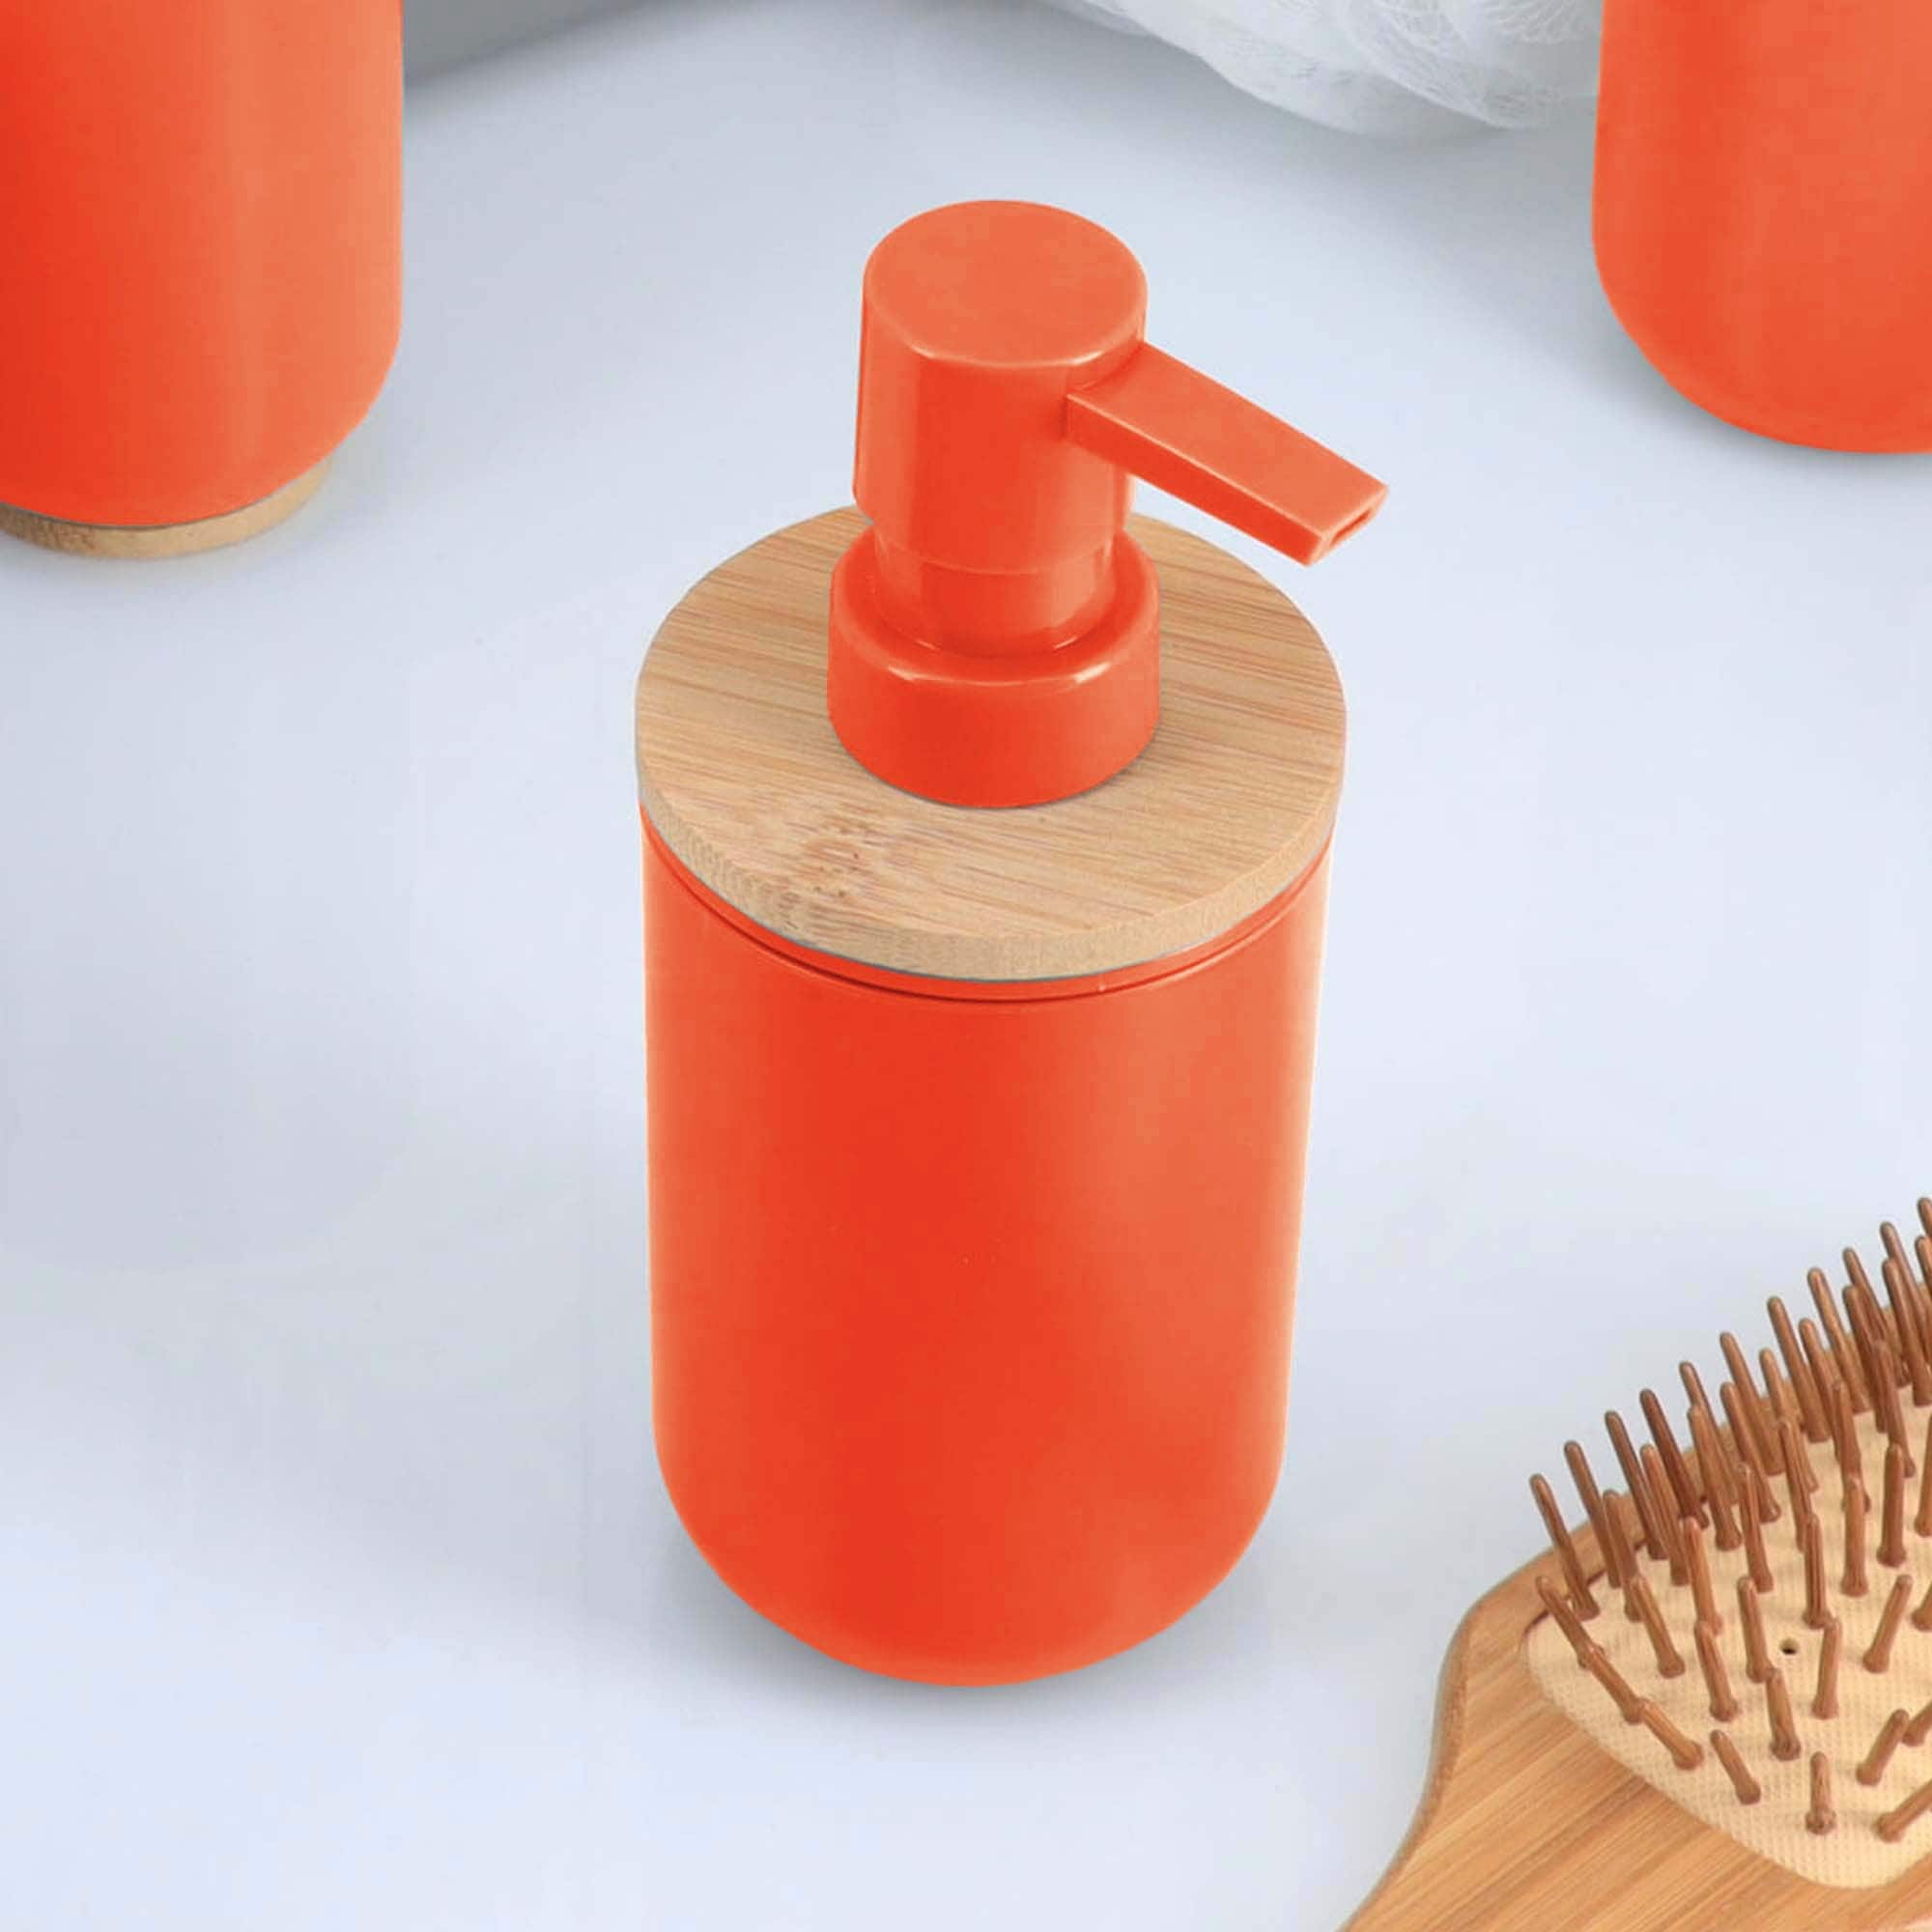 https://ak1.ostkcdn.com/images/products/is/images/direct/91318bce87999ff9f368920f7570984d276f8d24/Padang-Bathroom-Accessories-Set-Bamboo.jpg